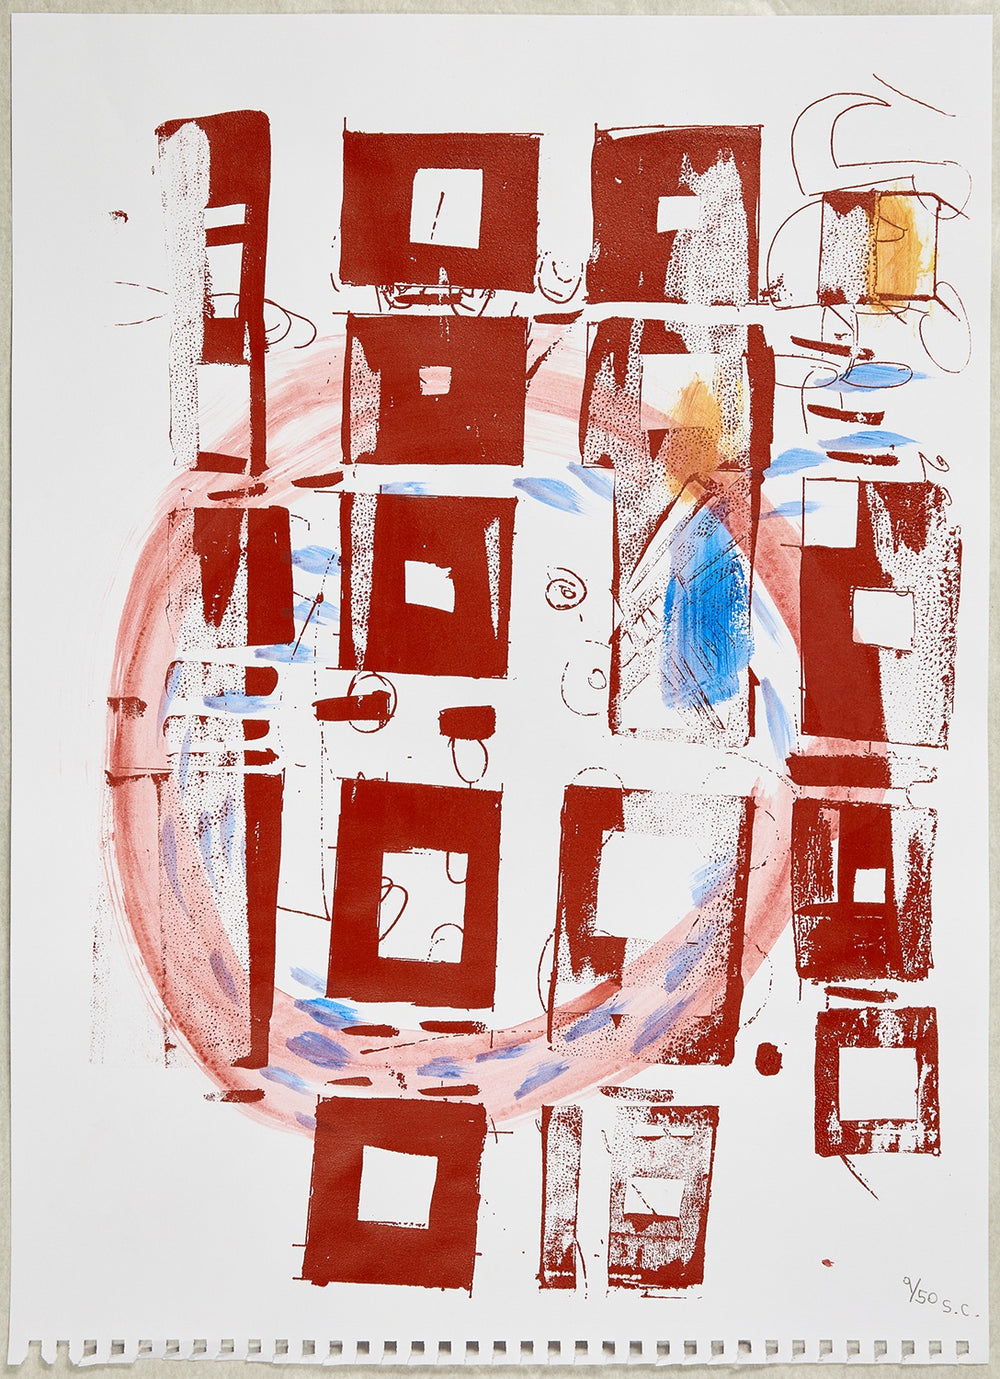 An artist edition on paper by artist Susan Cianciolo. The print is abstract and made of bright red squares and shapes. 